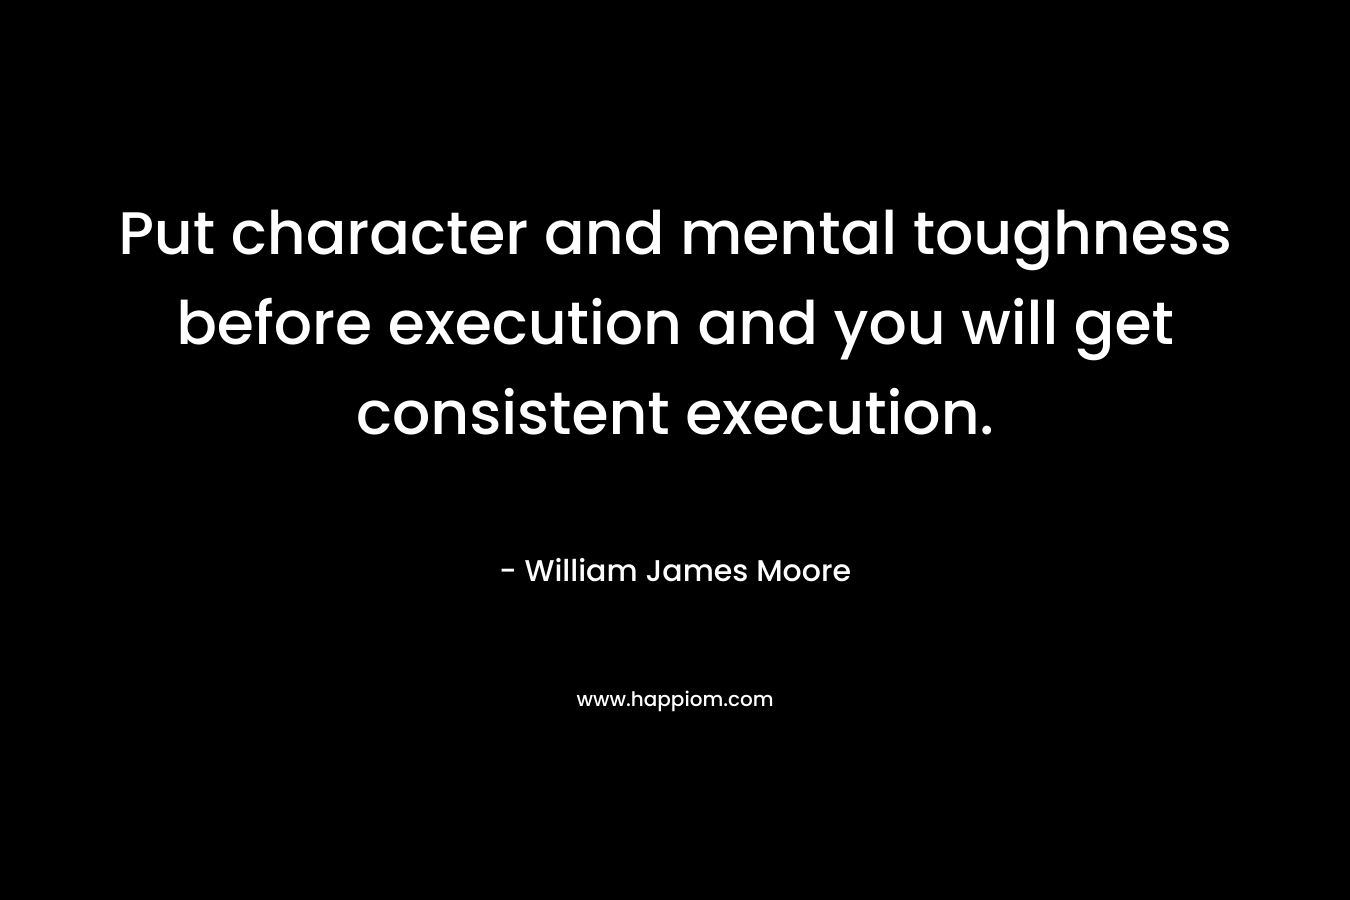 Put character and mental toughness before execution and you will get consistent execution. – William James Moore